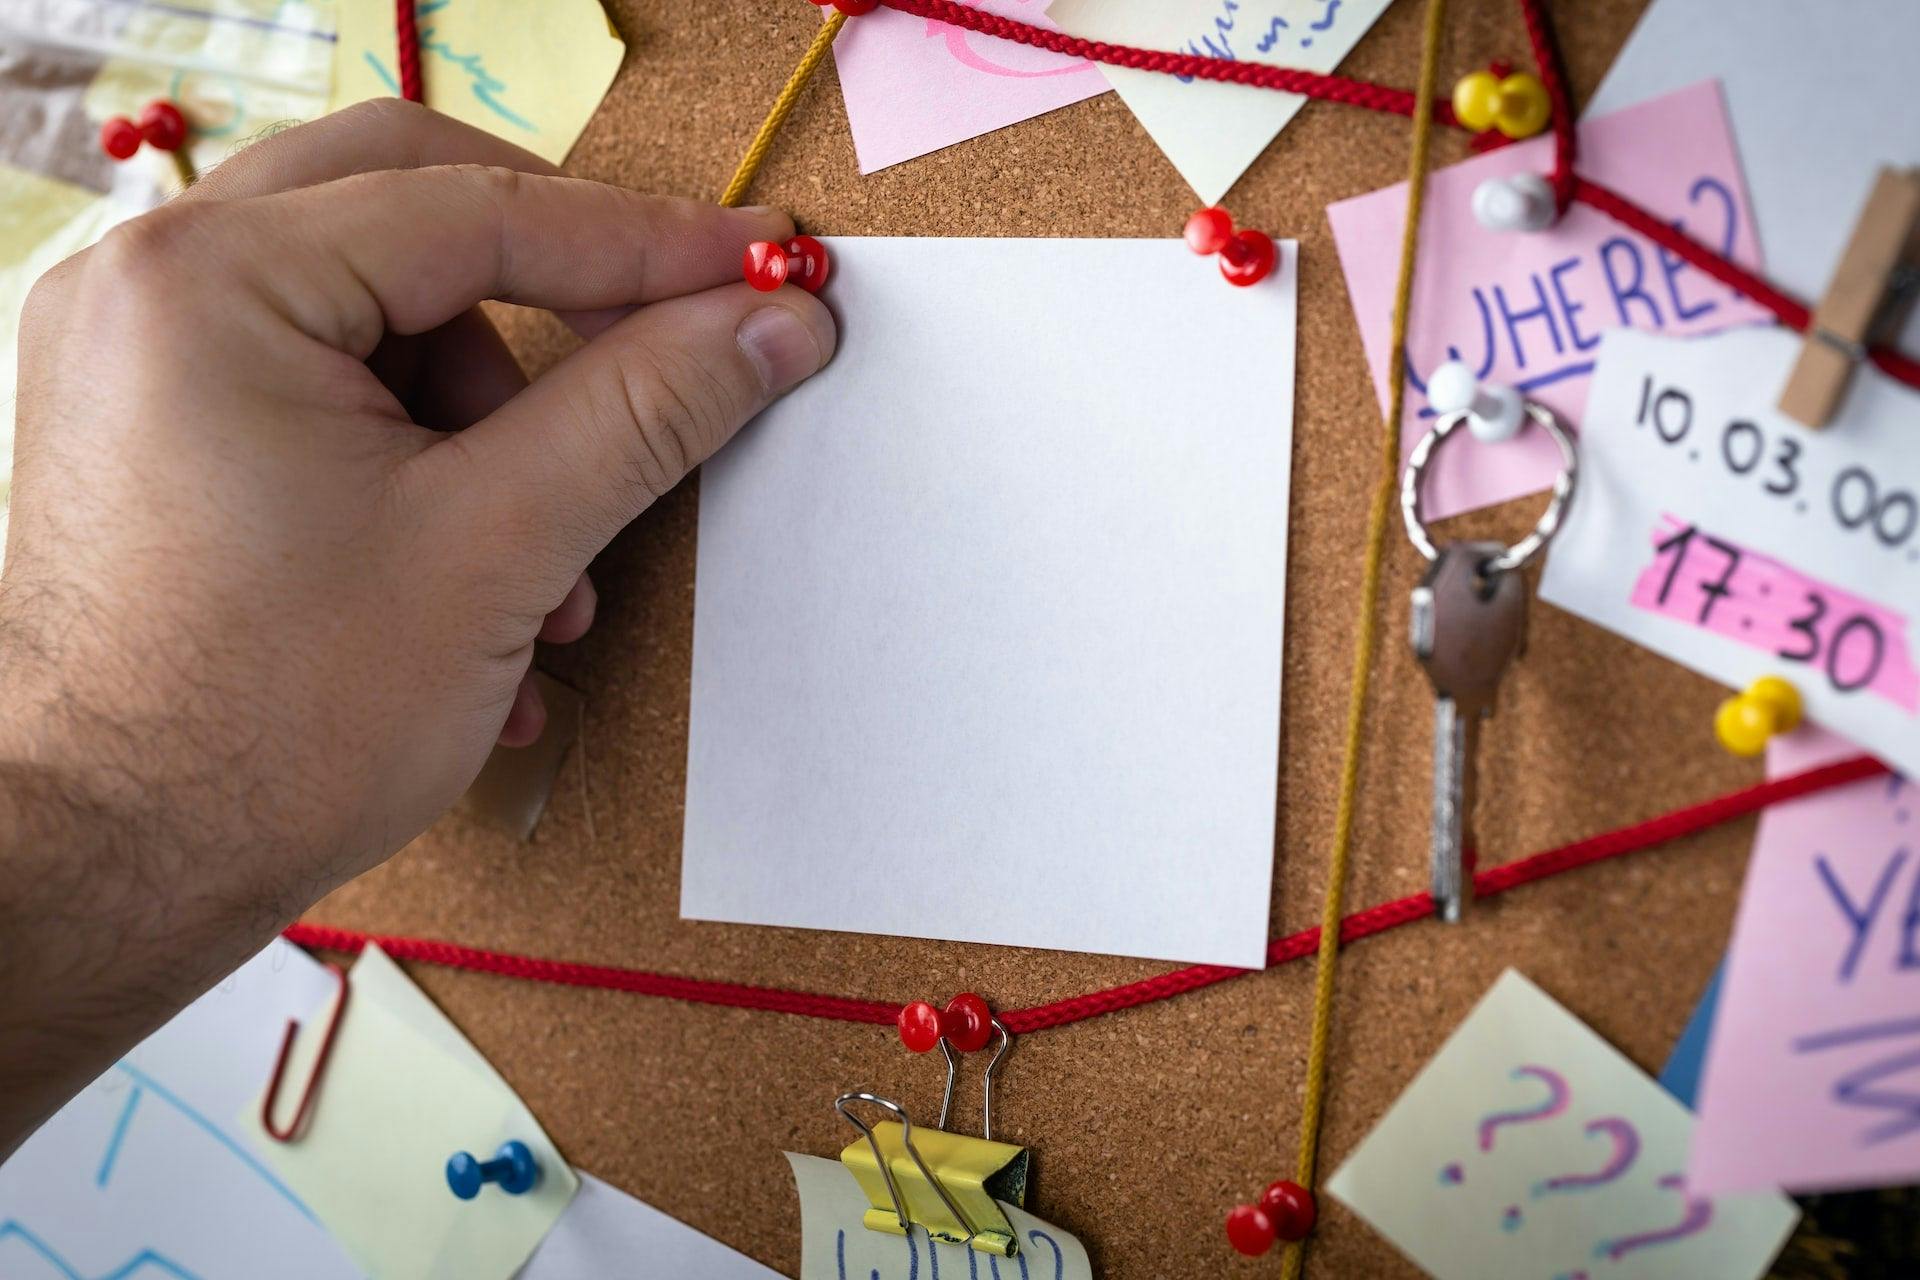 Hand pins a sticky note to a cork board with thread connecting different items and clues